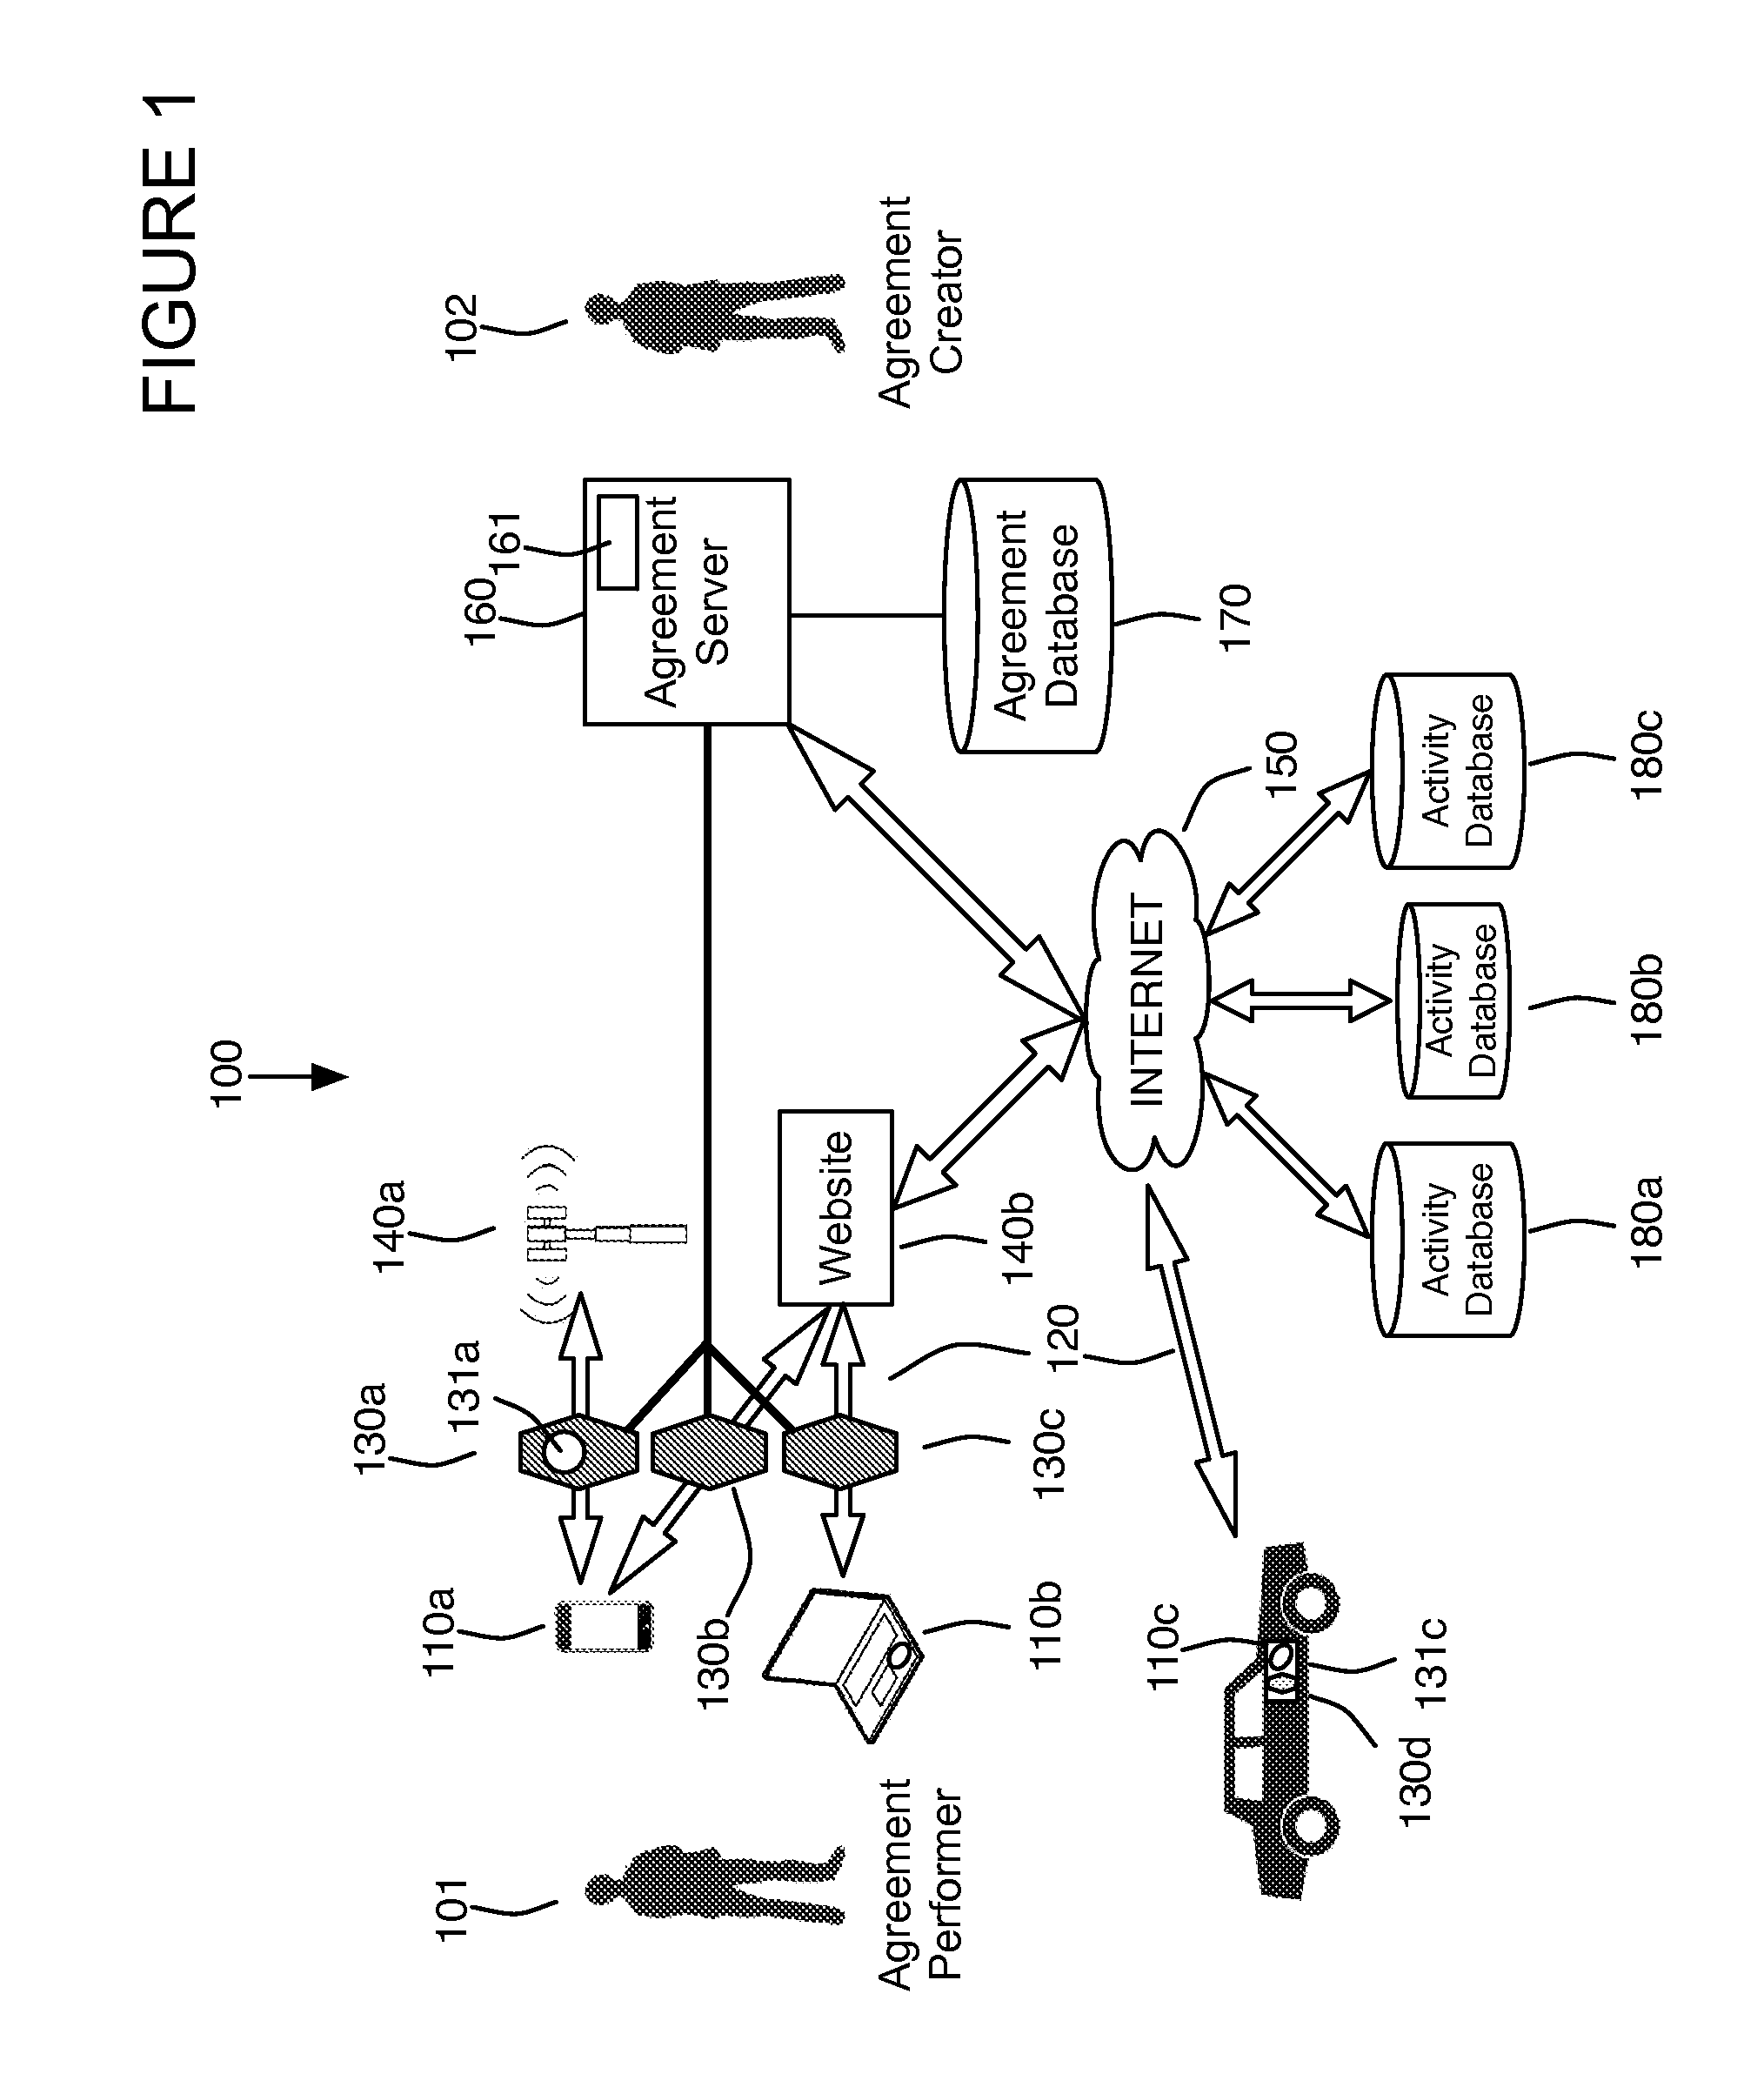 Agreement compliance controlled electronic device throttle